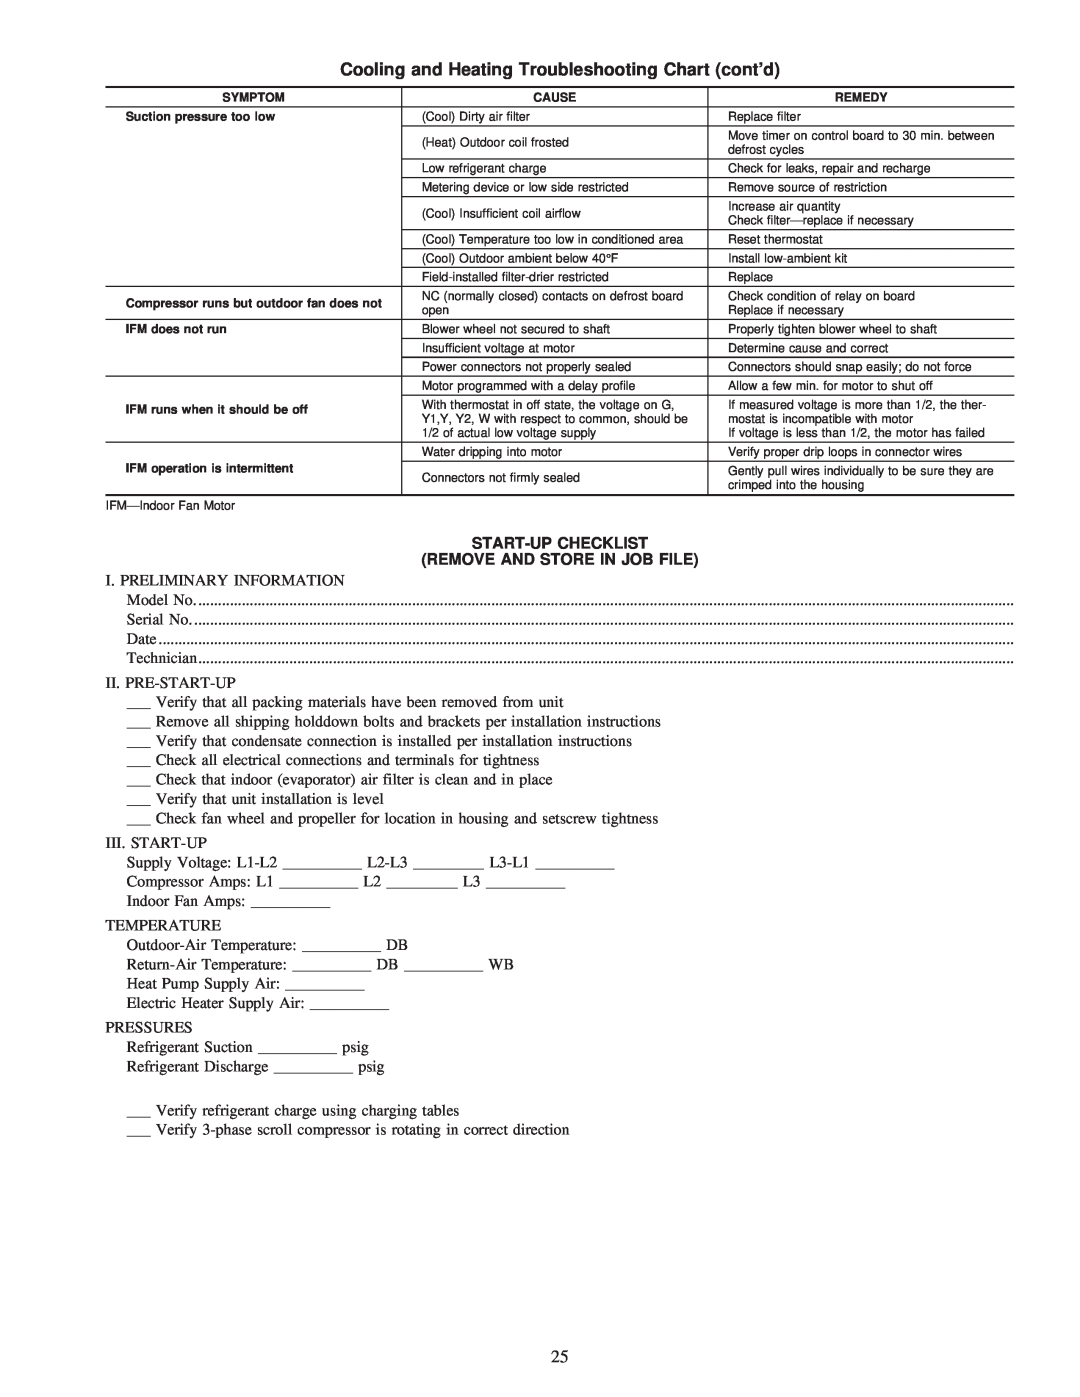 Carrier 50JS Cooling and Heating Troubleshooting Chart contd, Start-Upchecklist, Remove And Store In Job File 